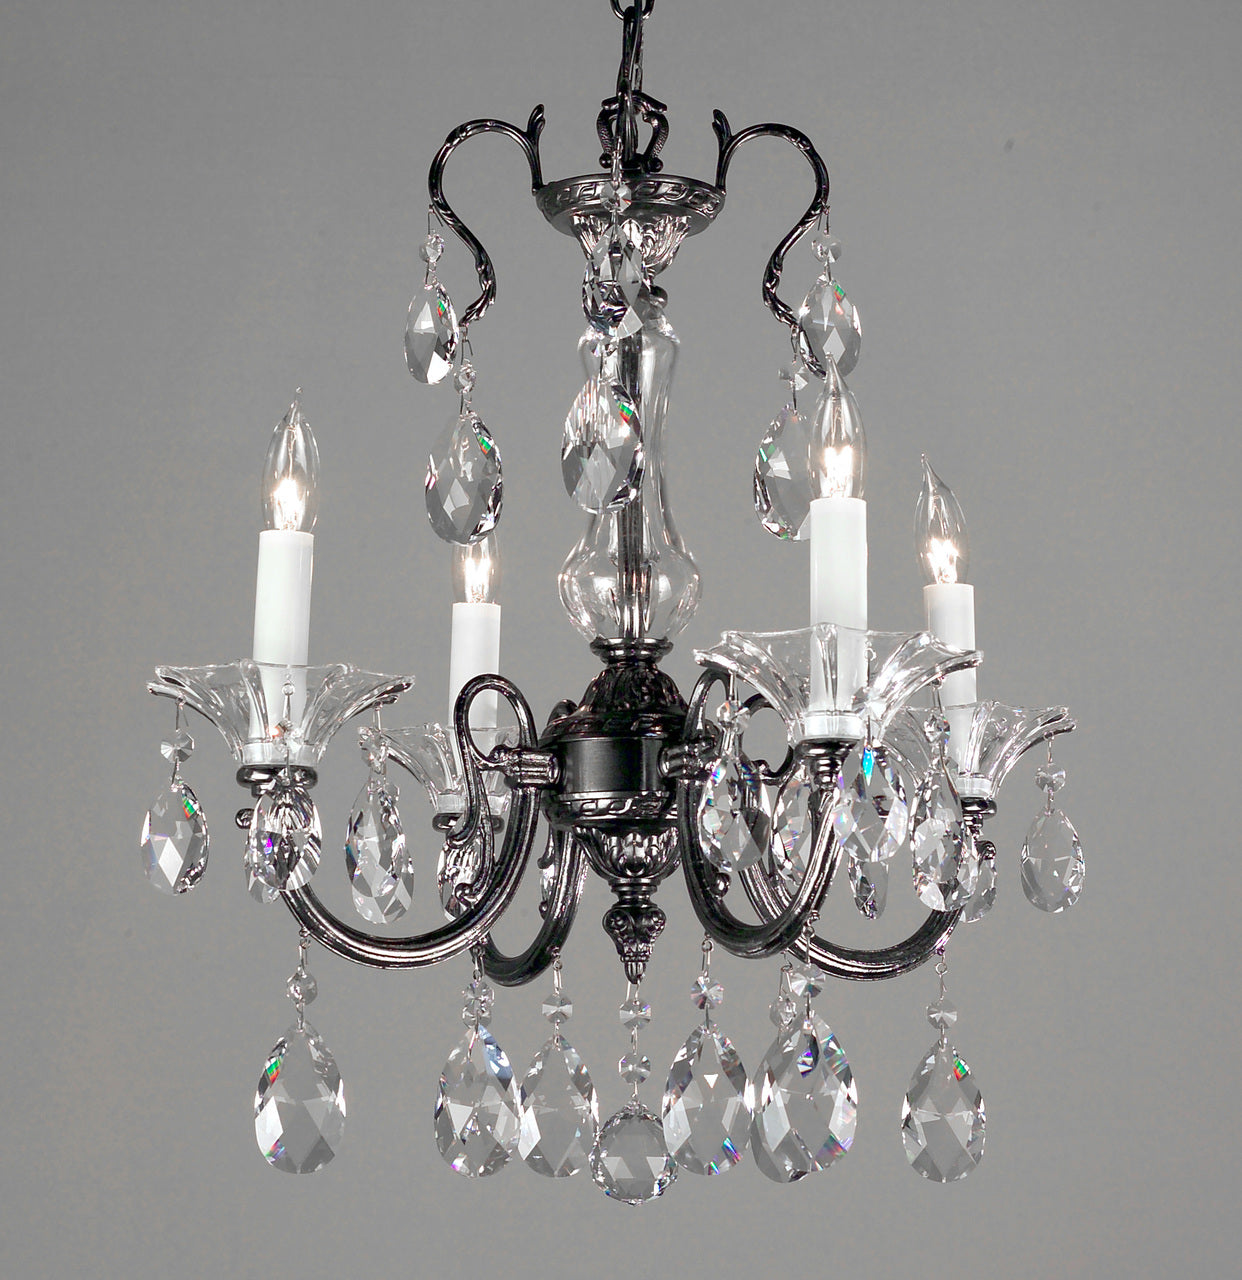 Classic Lighting 57054 EP SC Via Lombardi Crystal Mini Chandelier in Ebony Pearl (Imported from Spain)